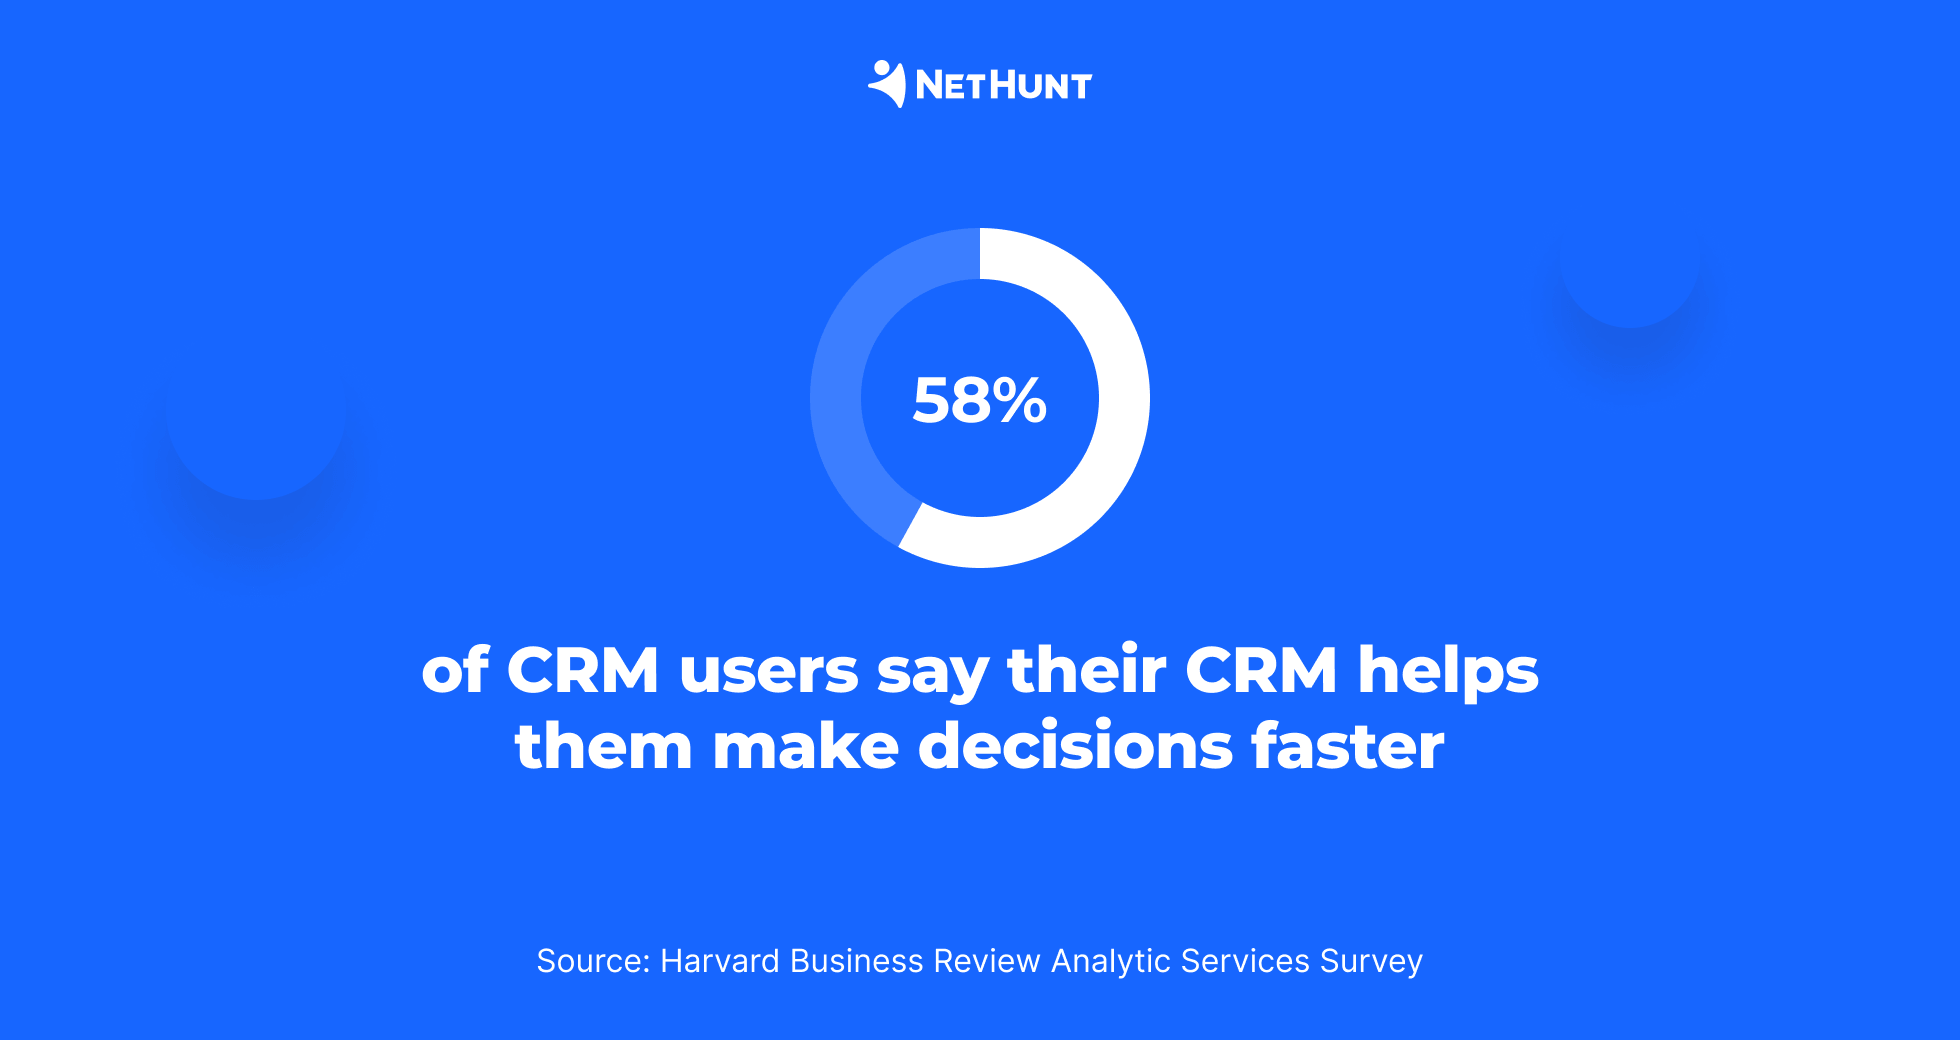 58% of CRM users say their CRM helps them make decisions faster